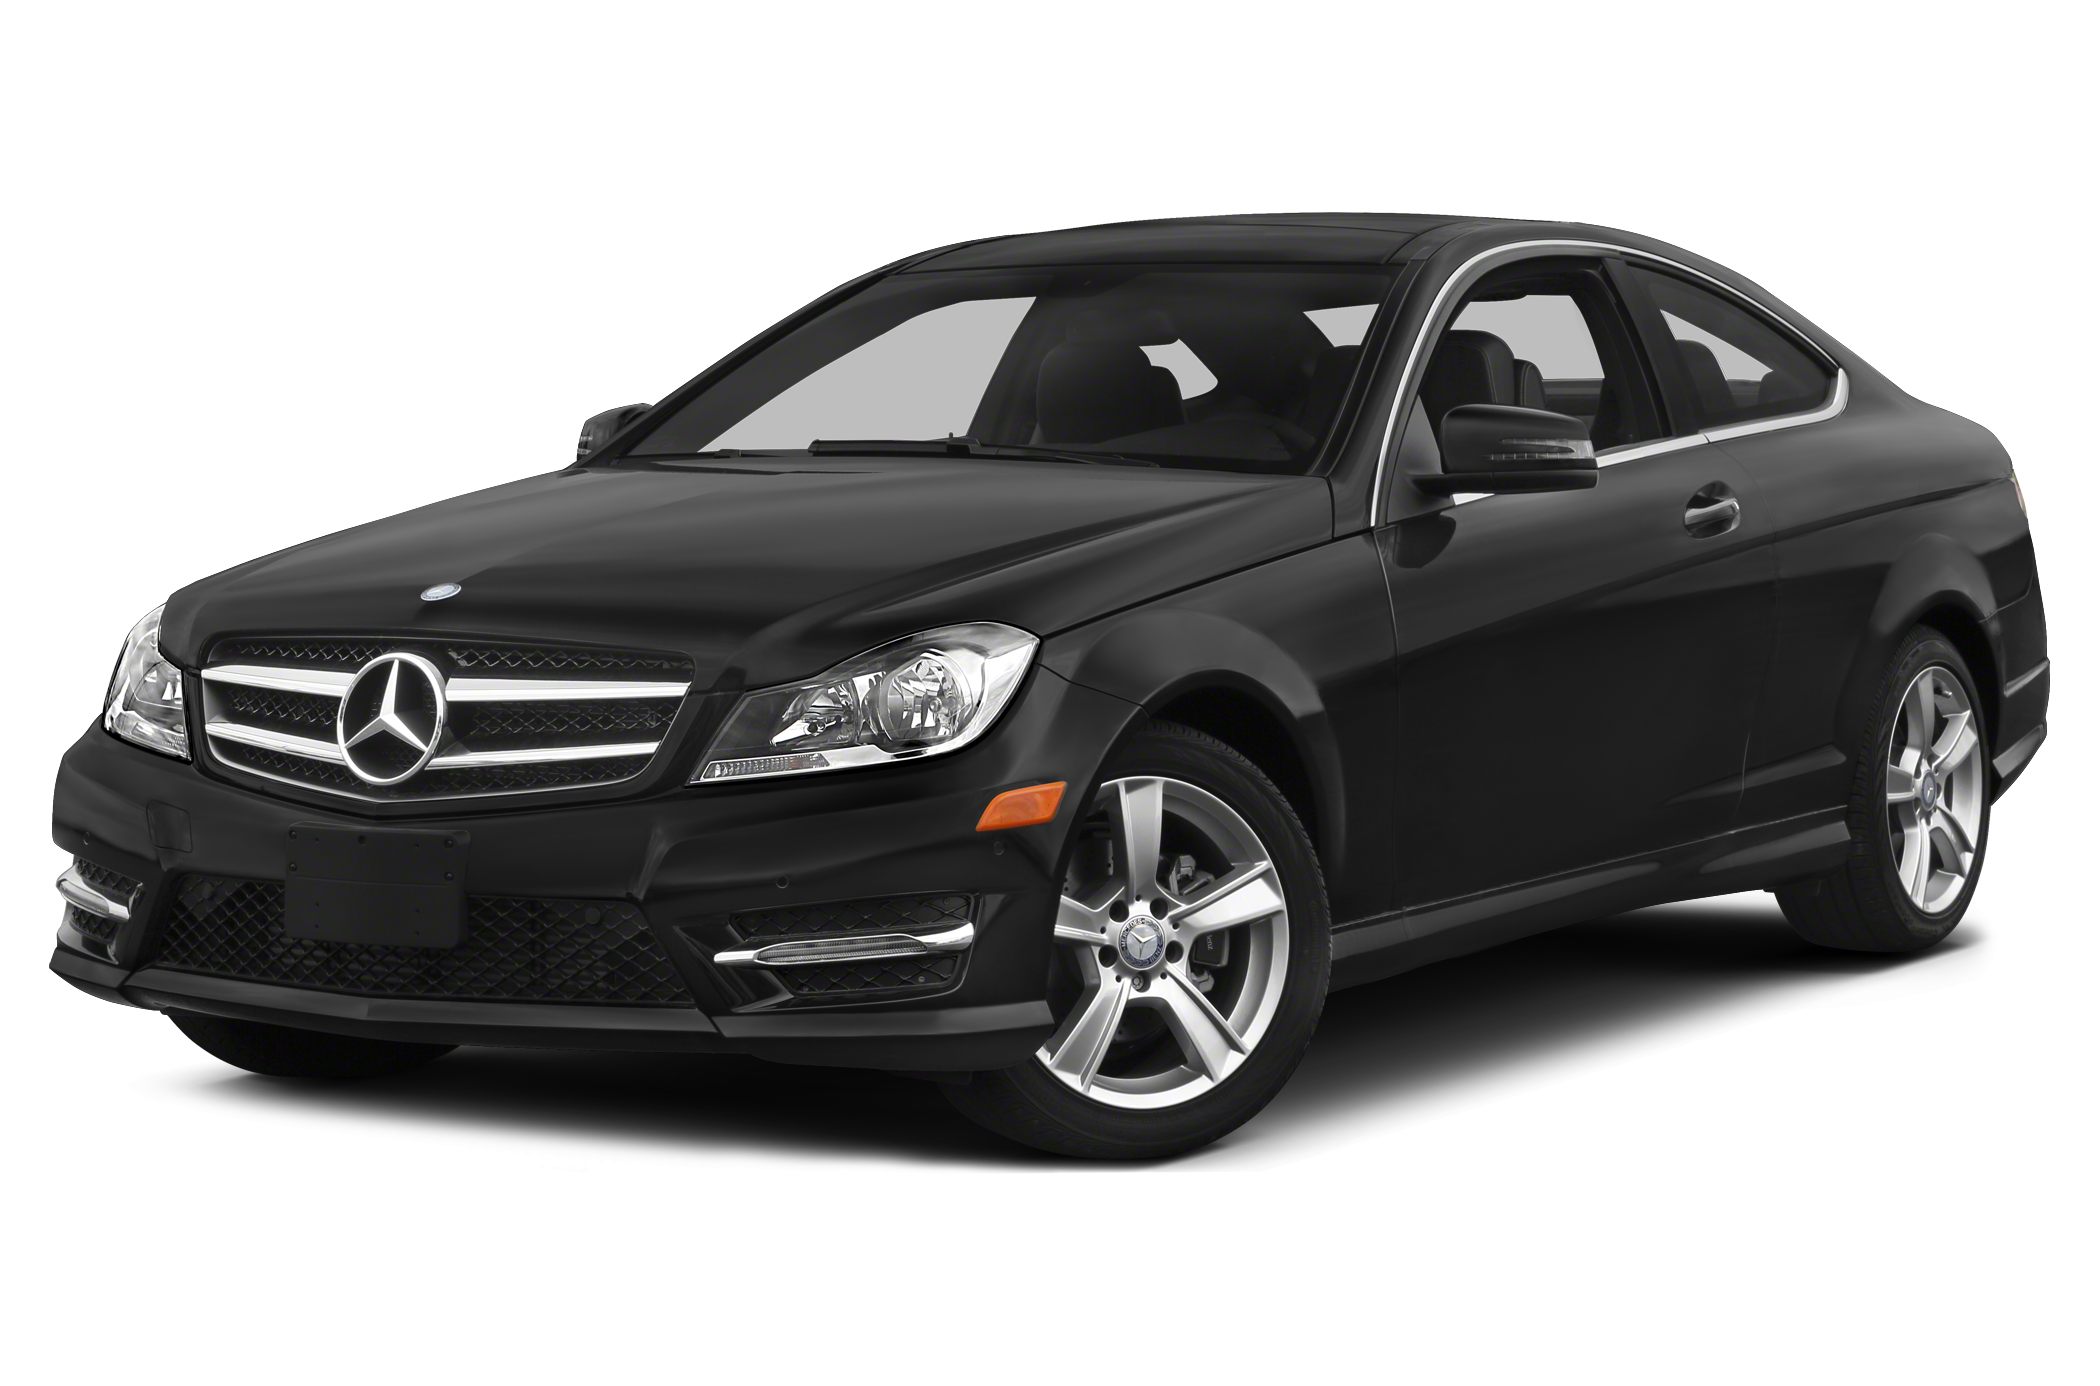  Mercedes-Benz C250 oem parts and accessories on sale